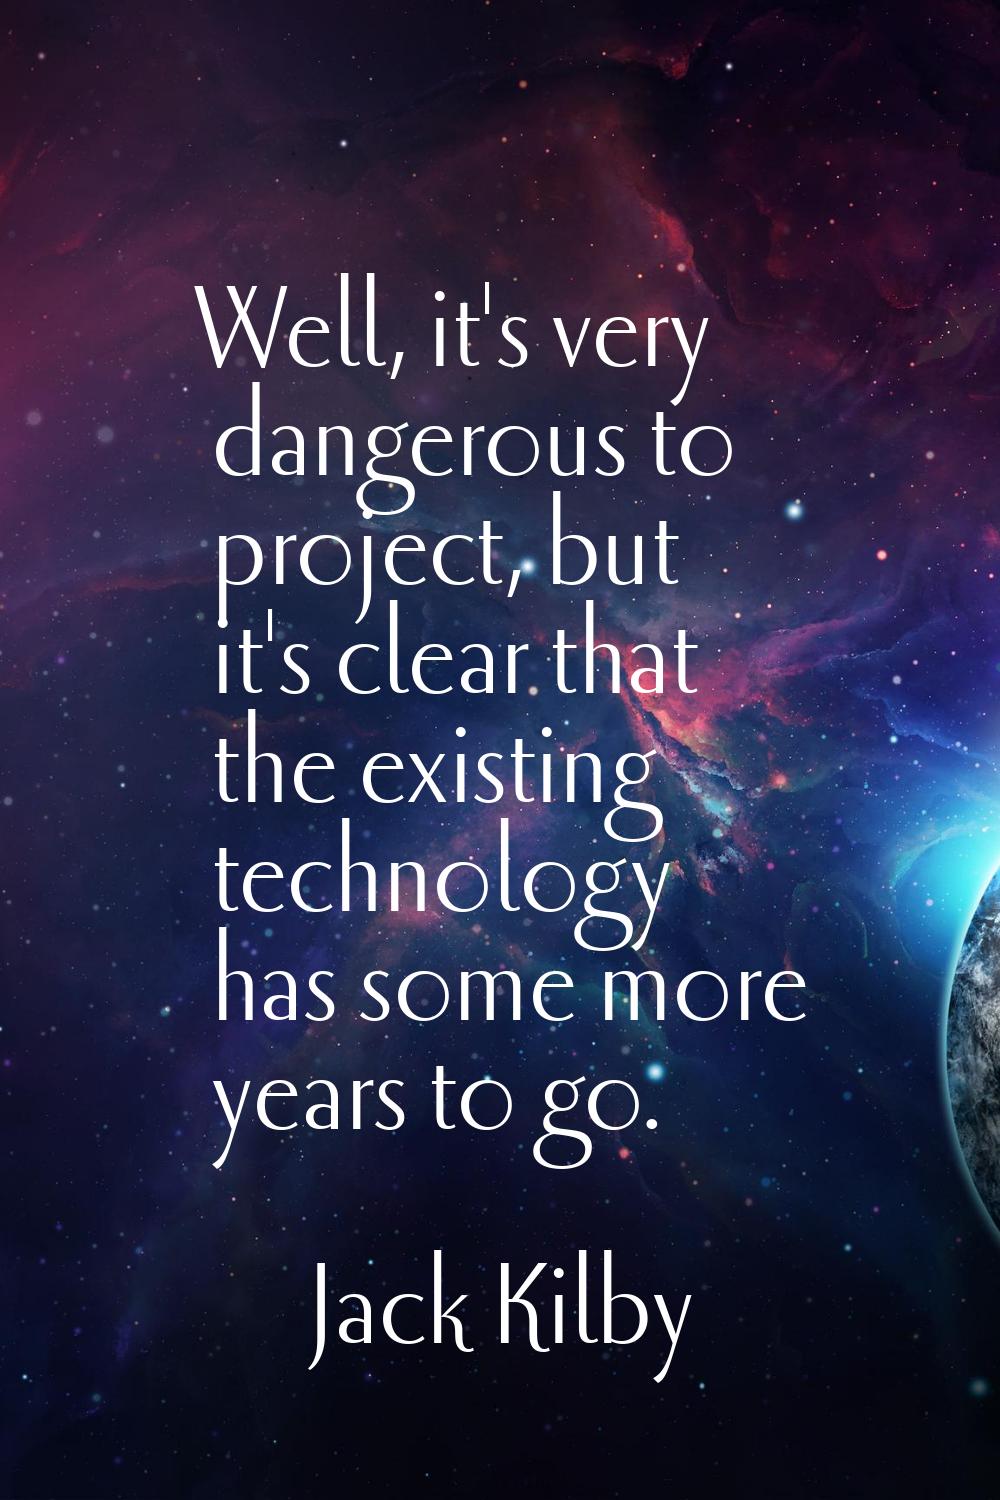 Well, it's very dangerous to project, but it's clear that the existing technology has some more yea